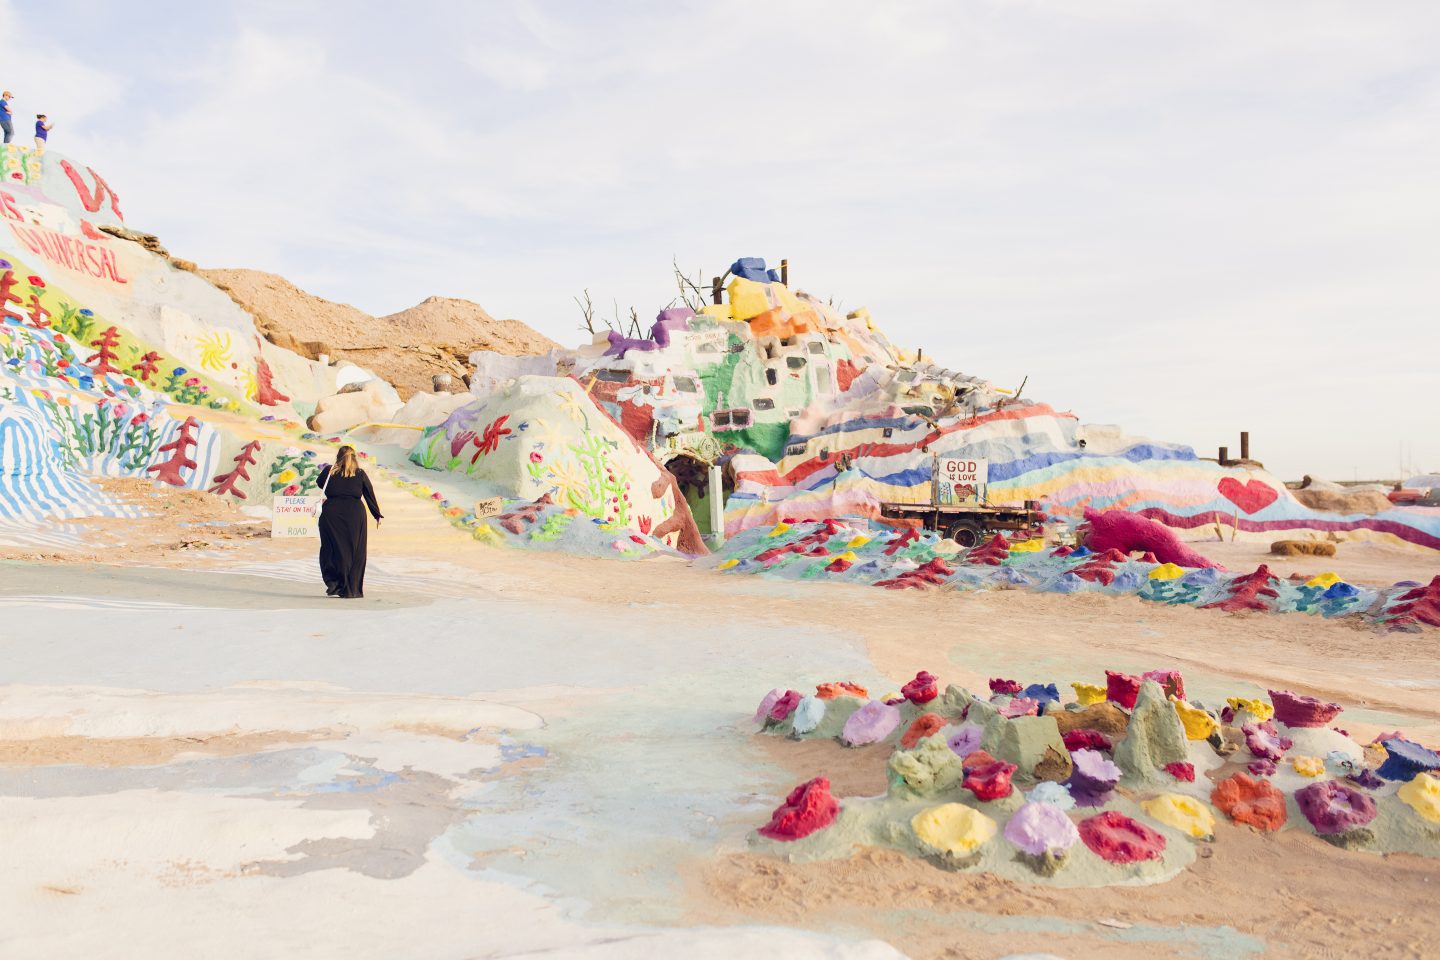 Salvation Mountain in California is in my top 10 favorite beautiful places in the US to visit.